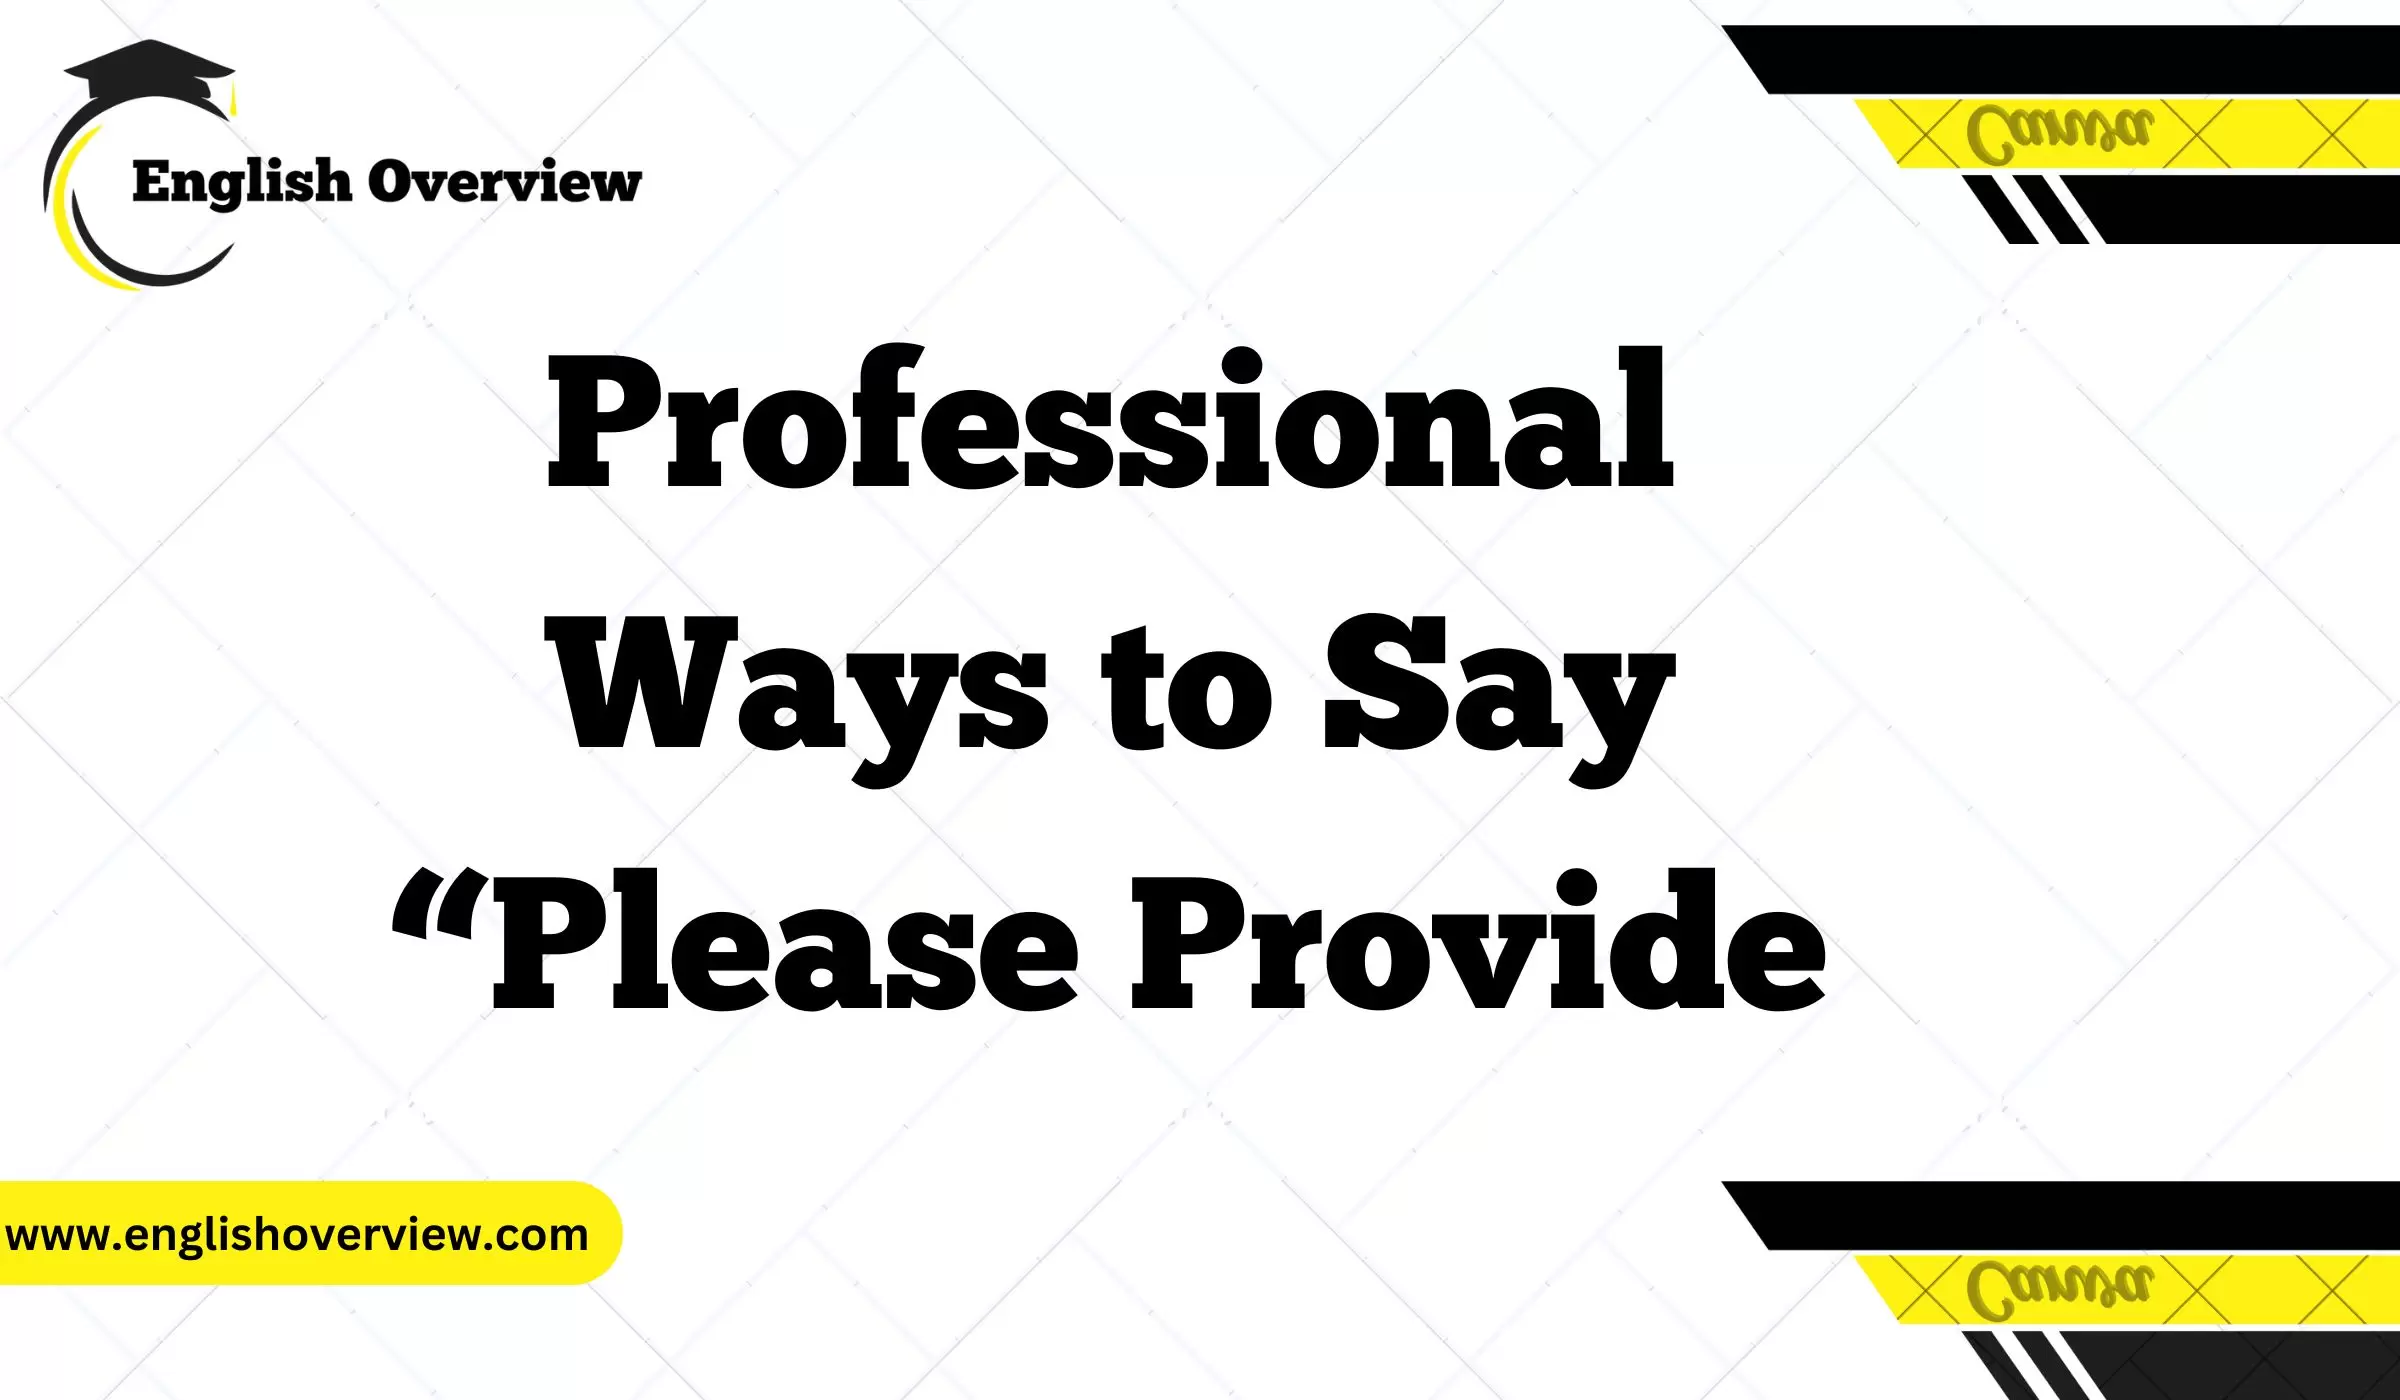 Professional Ways to Say “Please Provide”